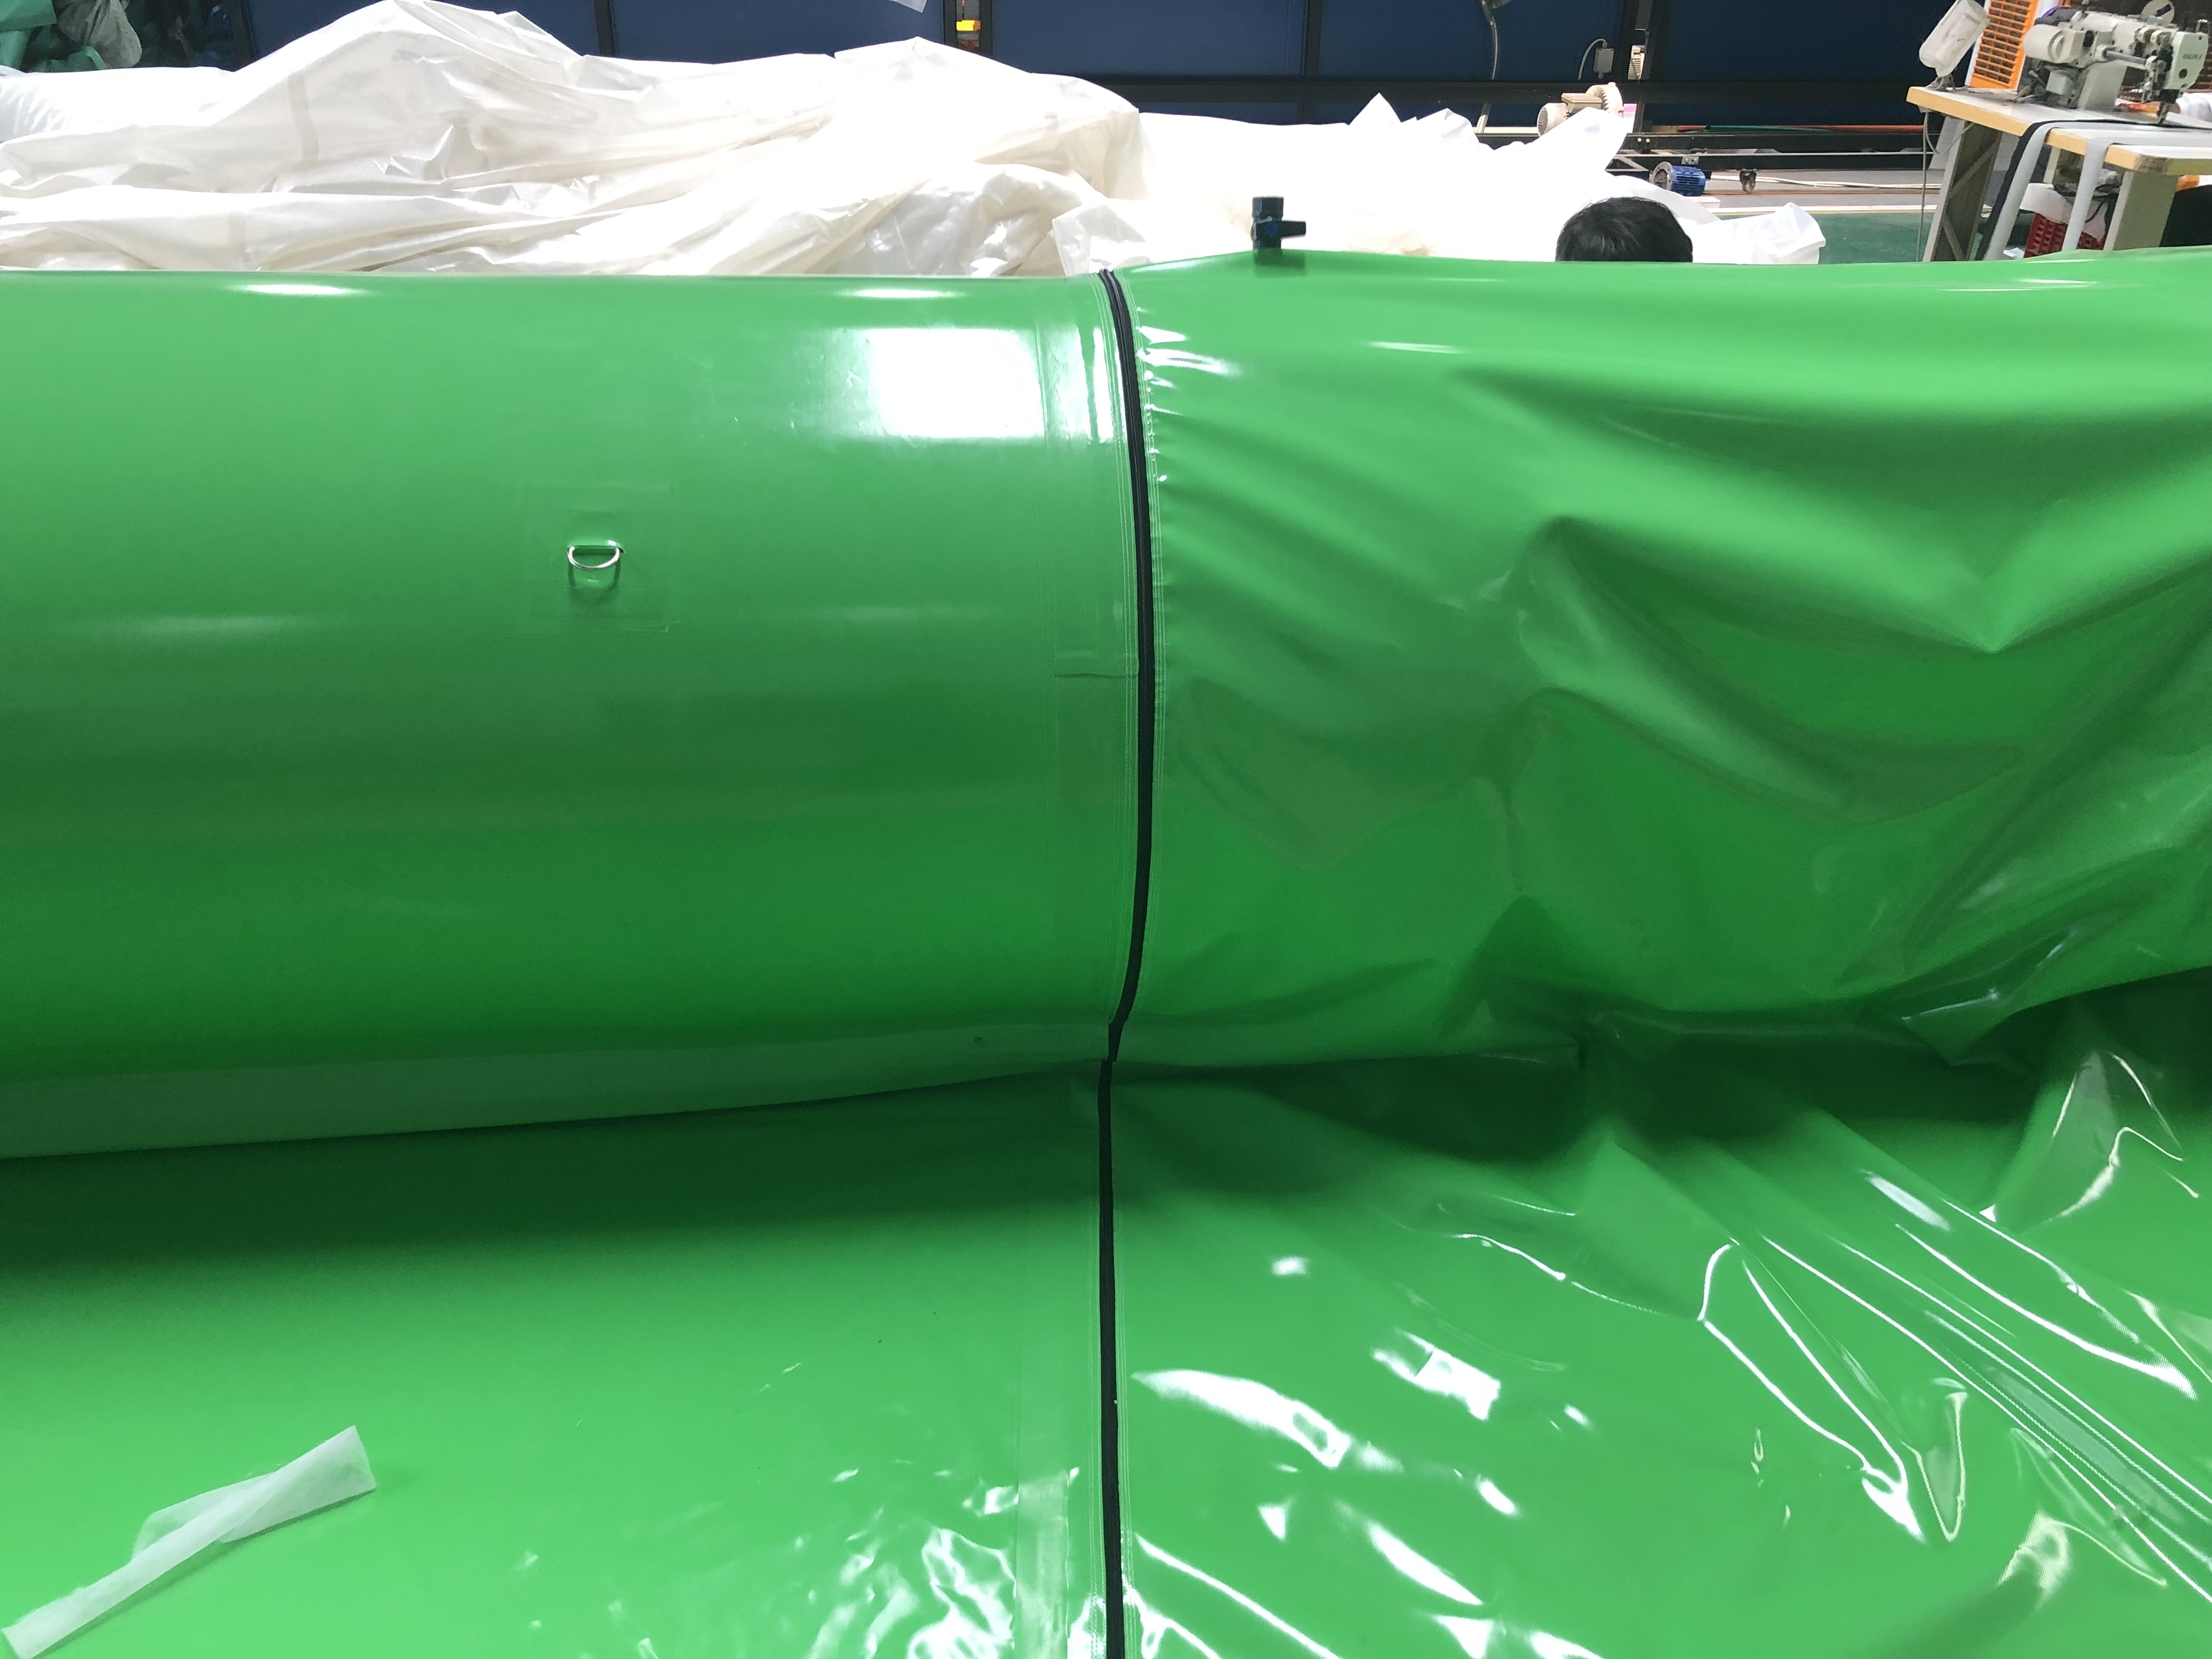 residential flood protection barriers,temporary flood protection barriers,inflatable water barrier,water barrier,green inflatable flood barrier tube,Connection by zipper,inflatable flood barrier,green flood barrier